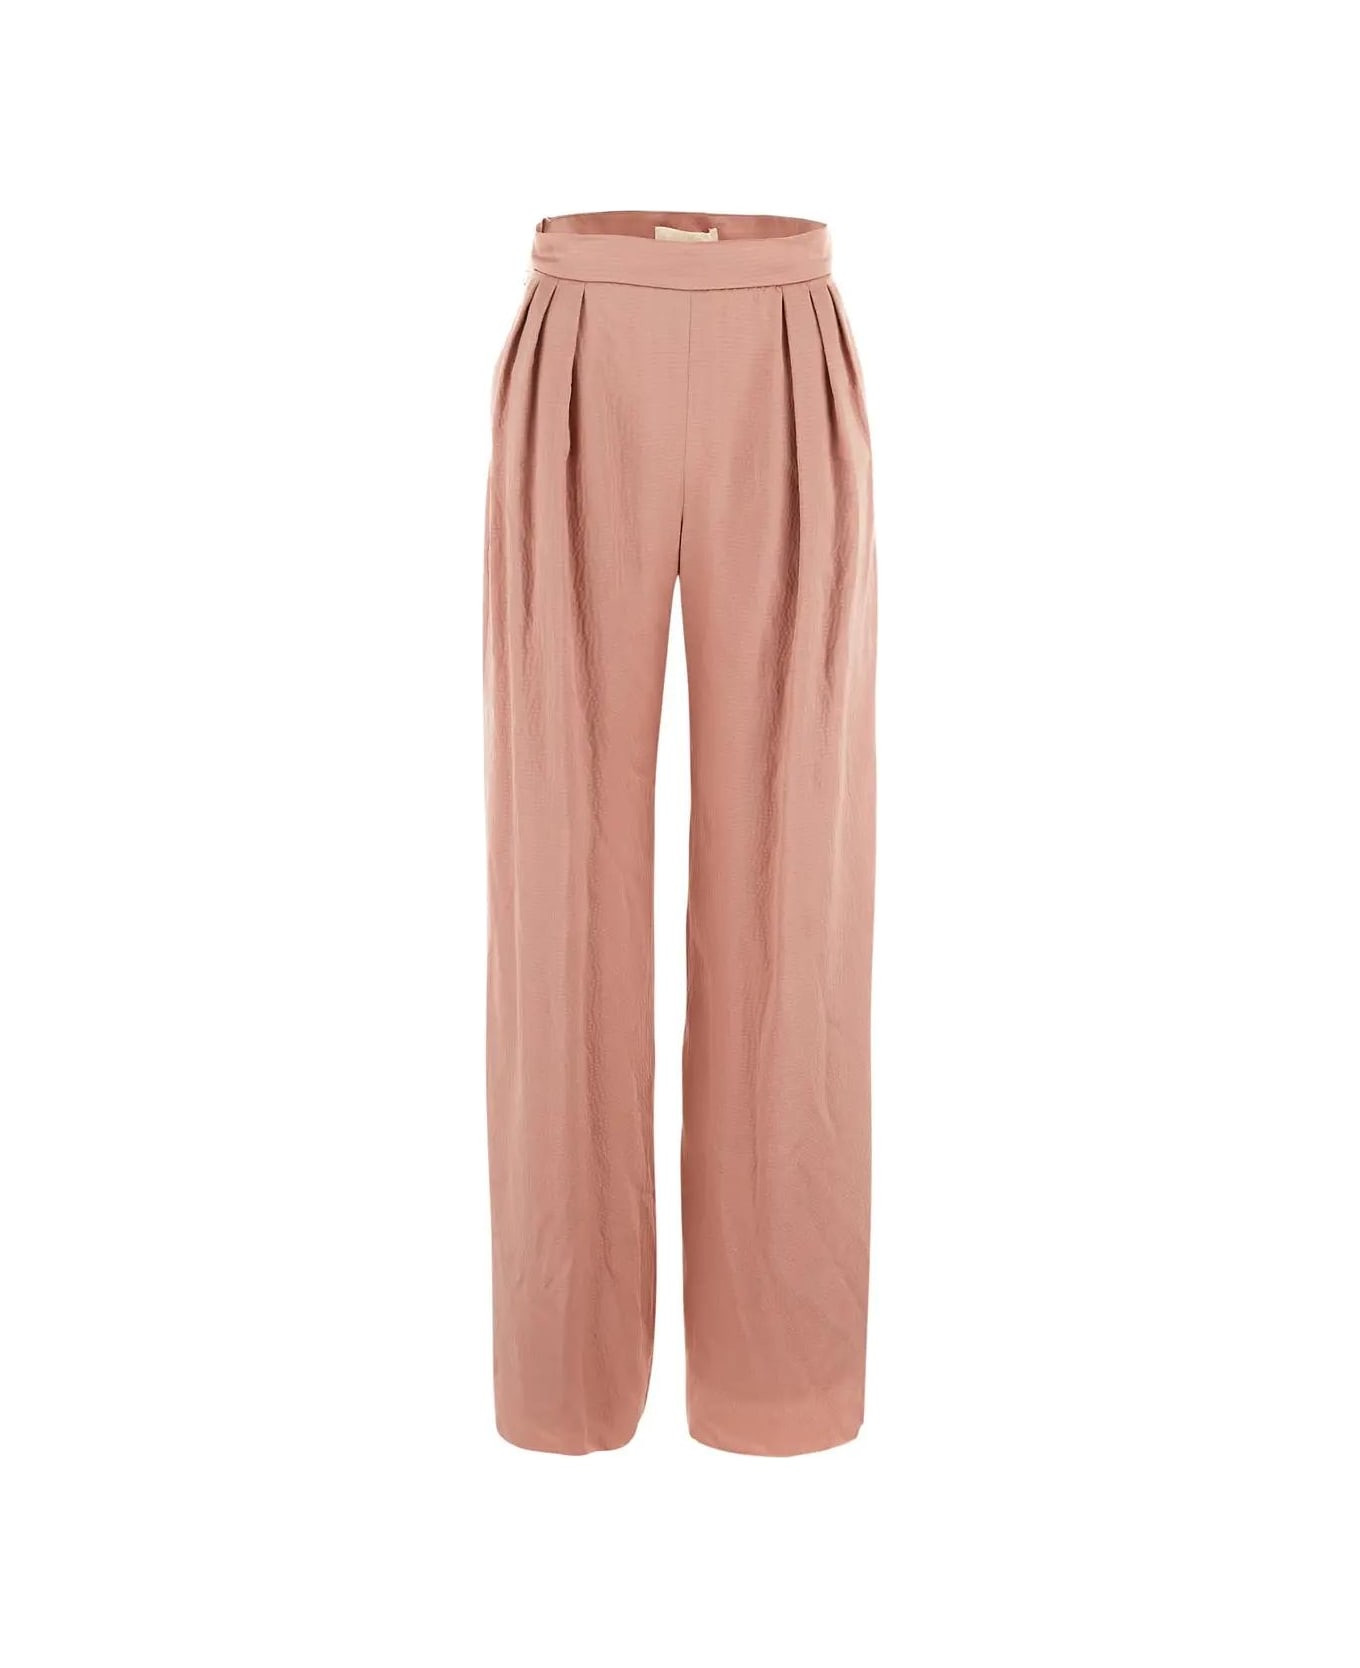 Max Mara Uncino Satin Trousers With Pleats - PINK ボトムス